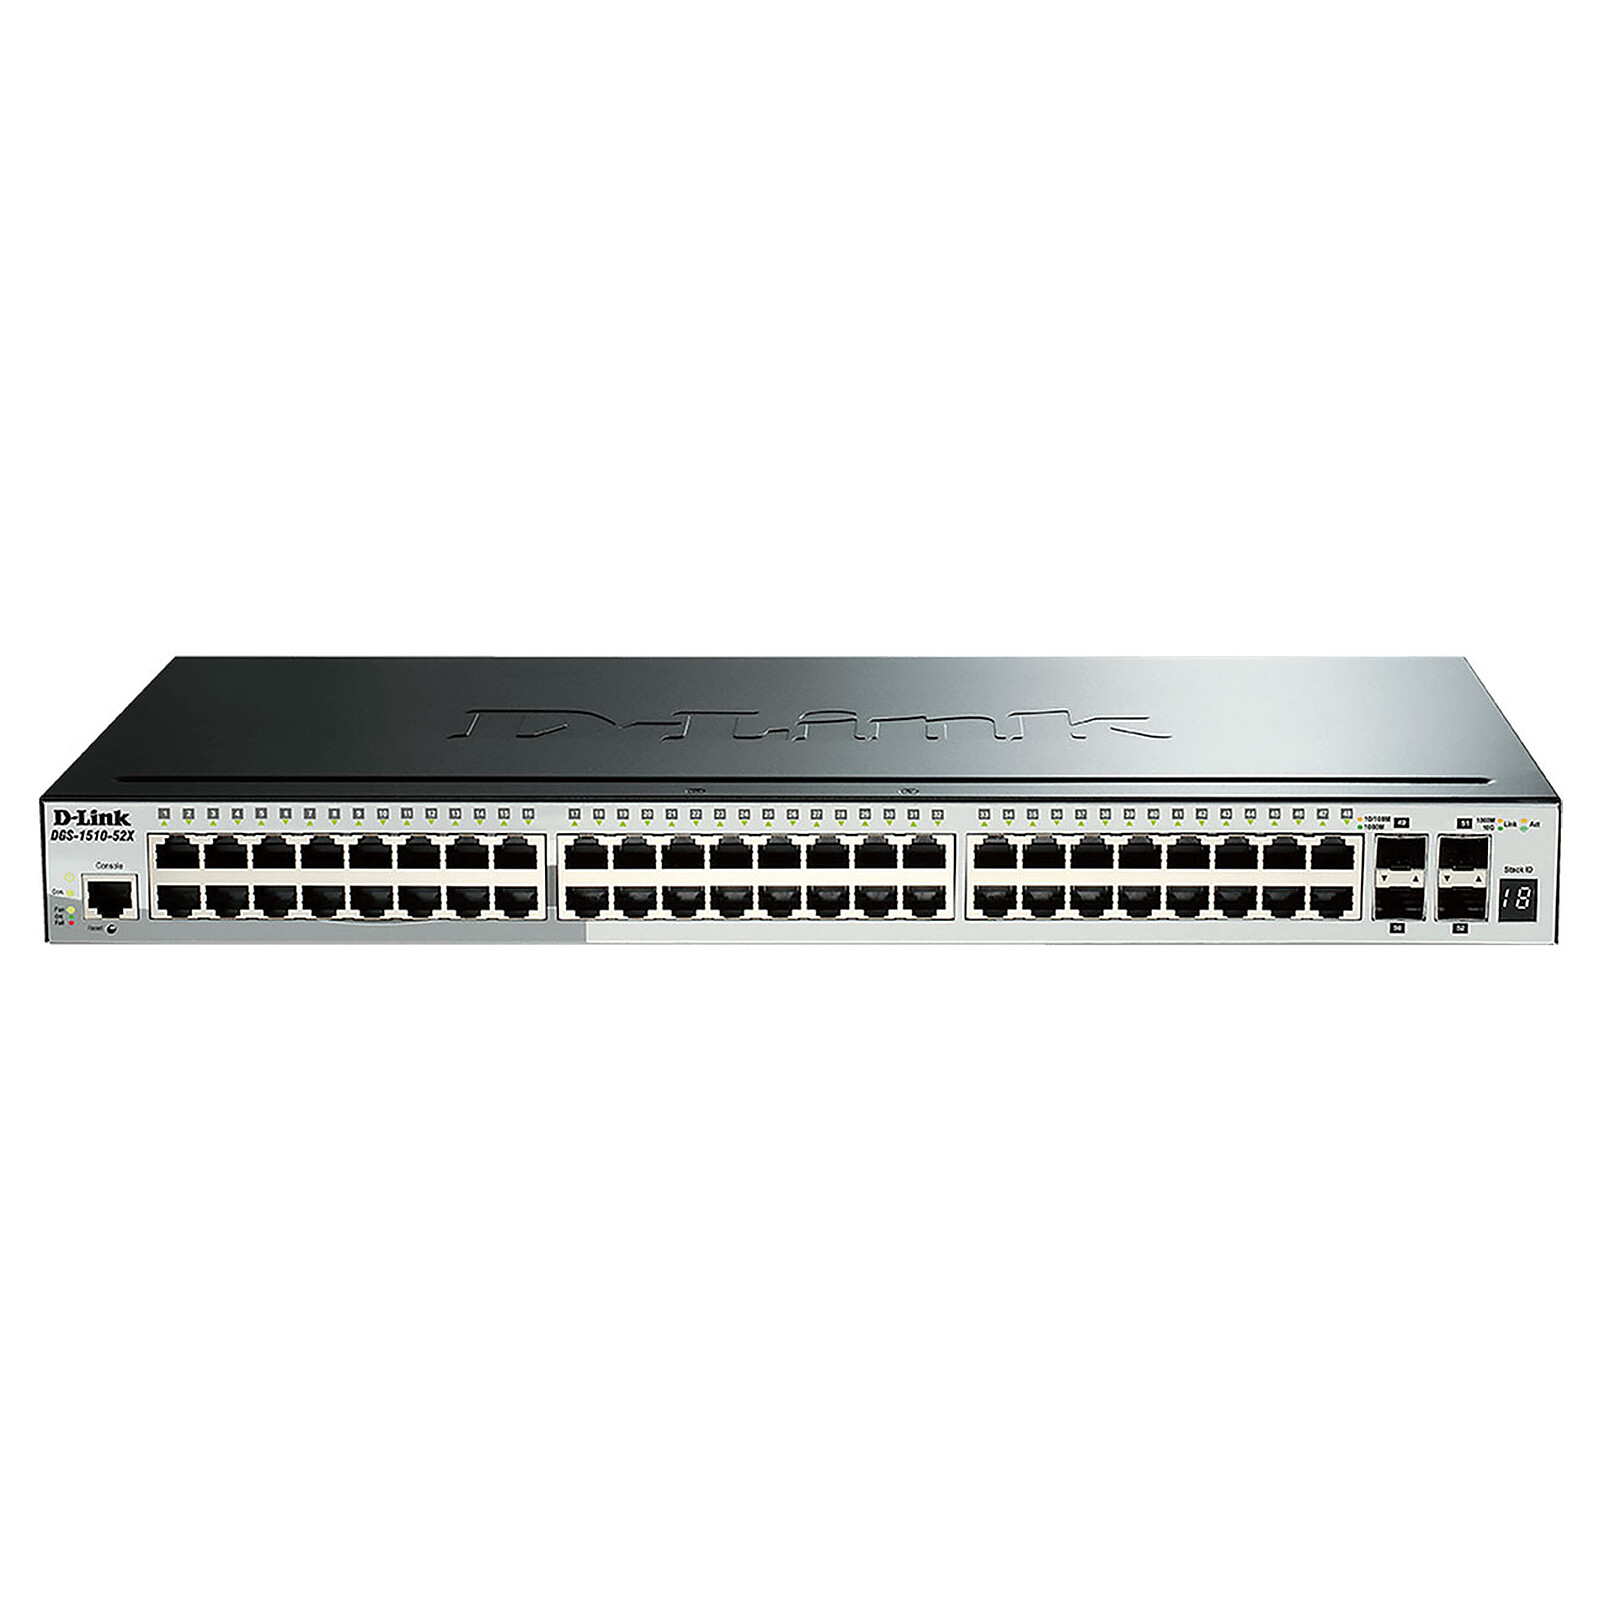 TP-LINK TL-SG108 - Switch - LDLC